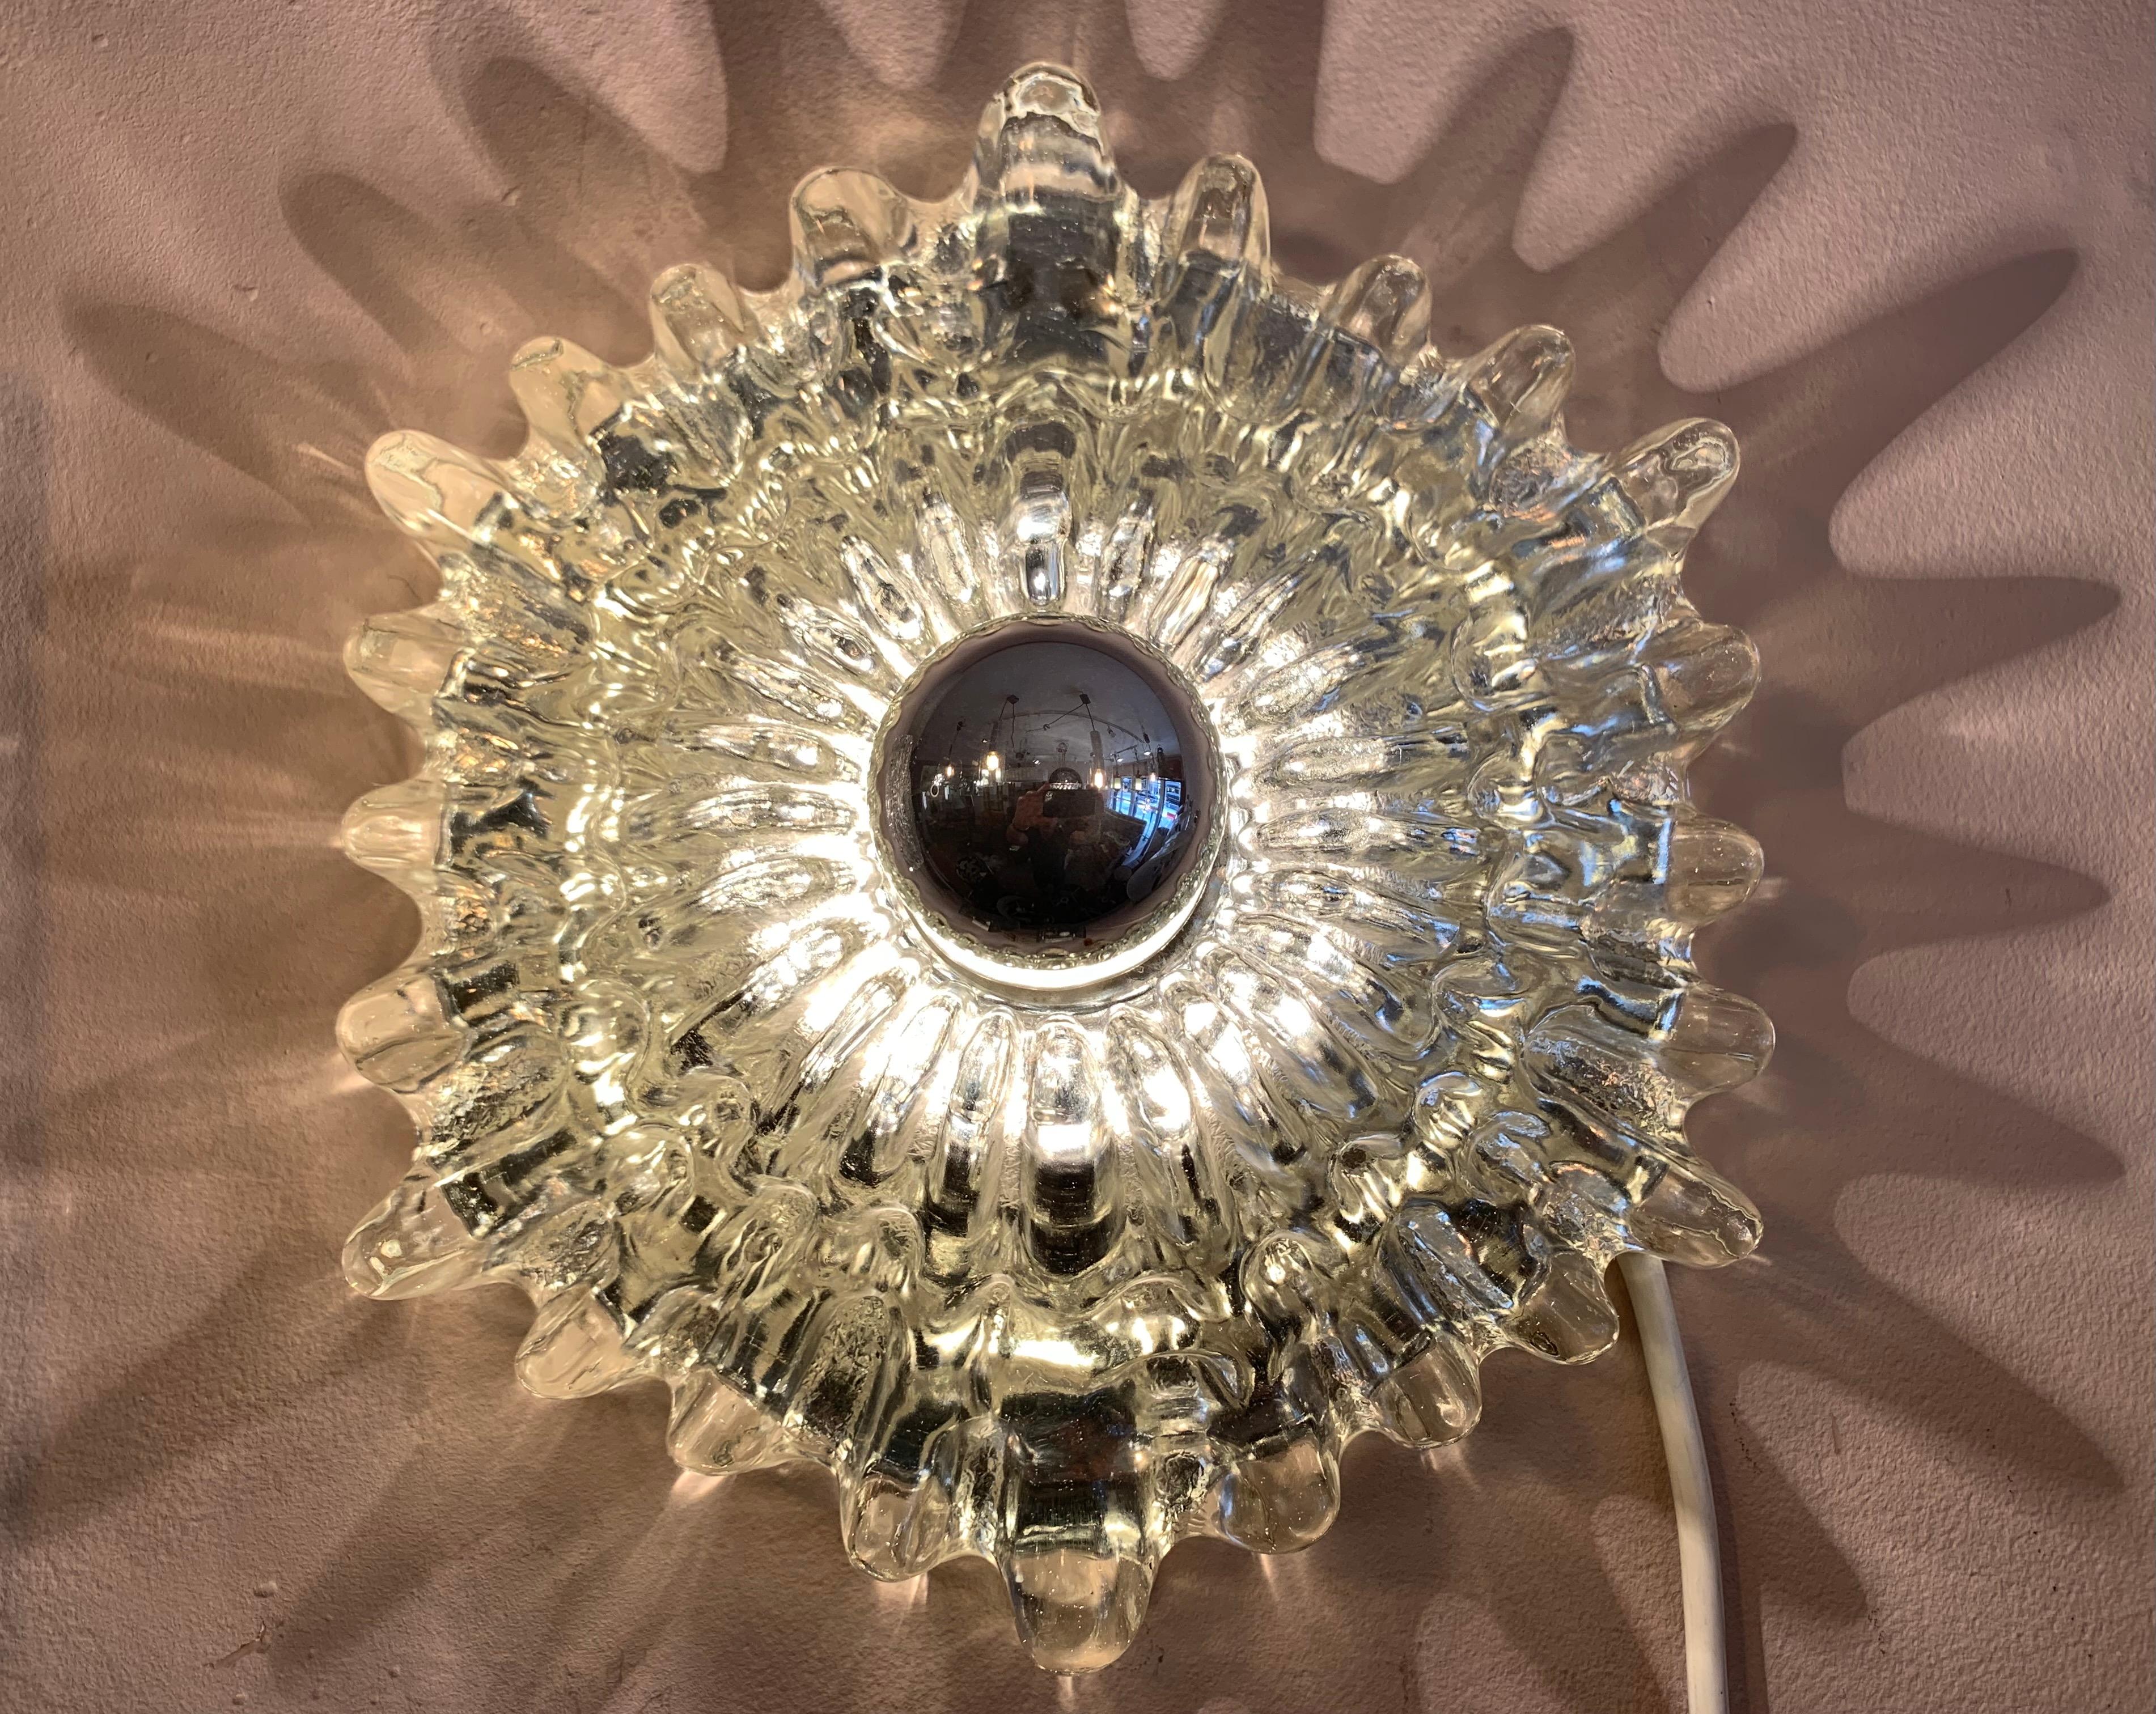 A stunning hexagonal, textured, clear glass wall light or sconce manufactured by Hillebrand in Germany during the 1960s/1970s. The glass is very thick and heavy with a deep textured flower shaped pattern. The single E27 silver-capped bulb sits in